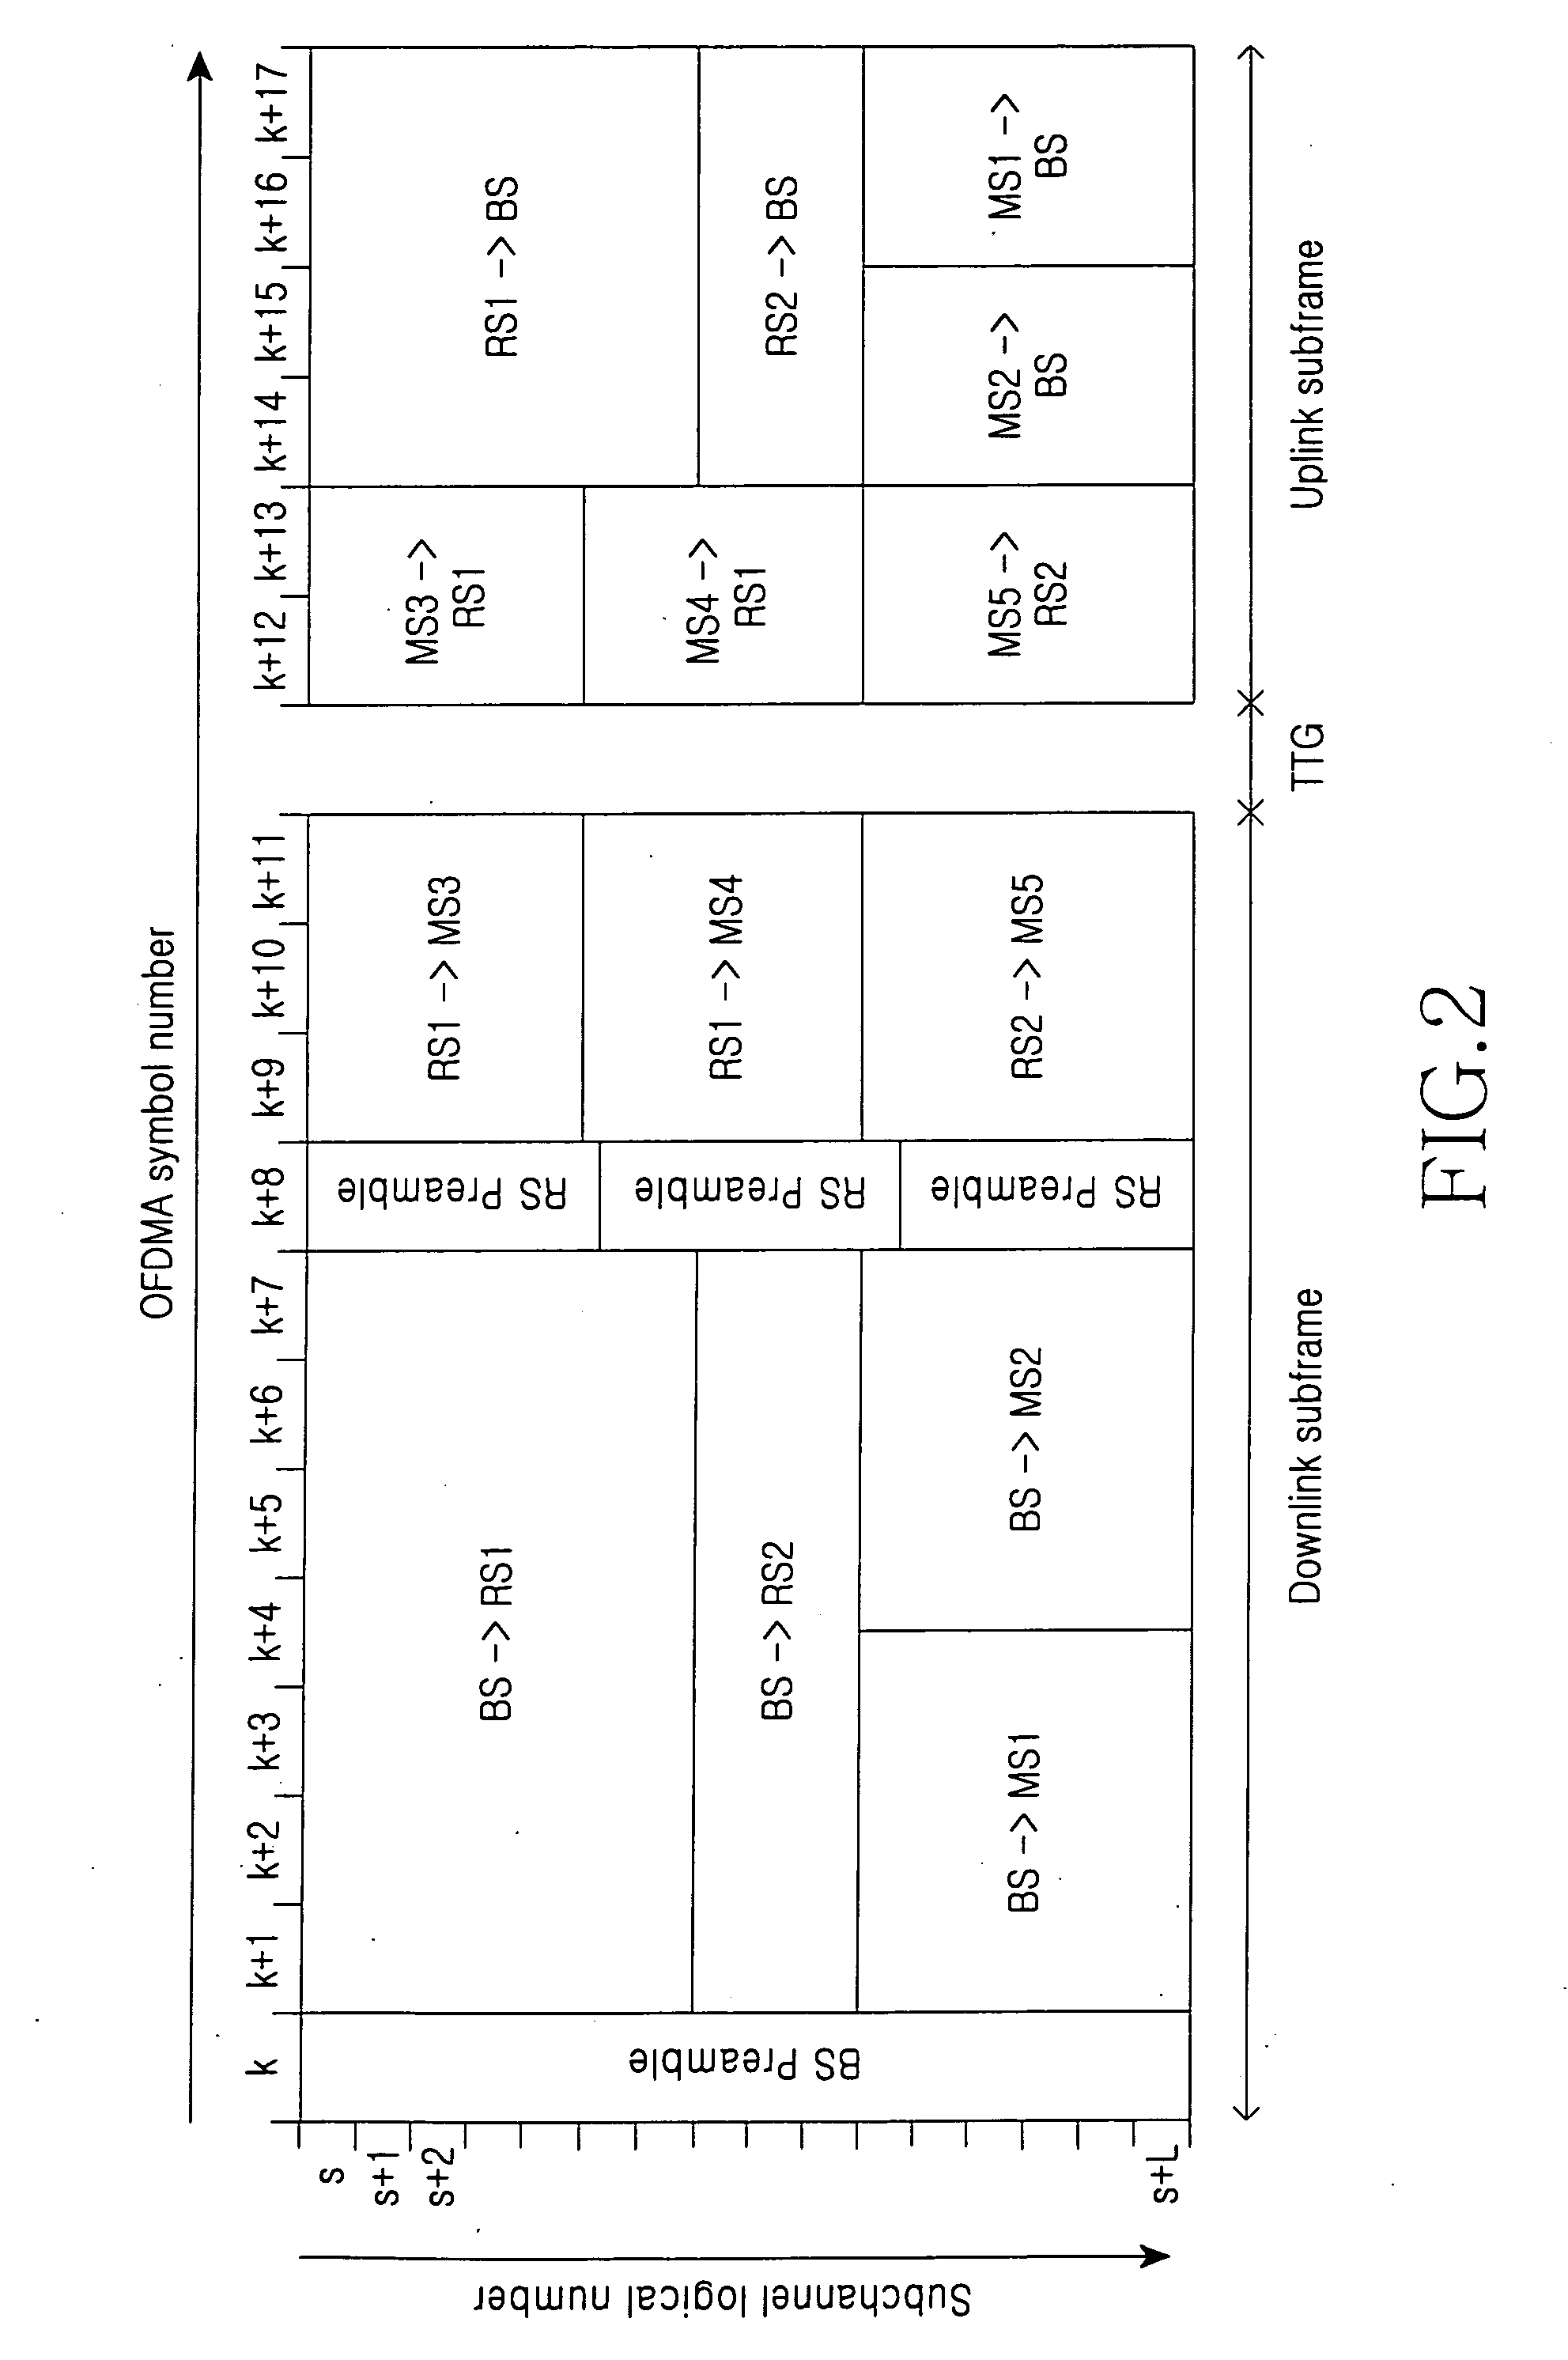 Routing apparatus and method in a multi-hop relay cellular network